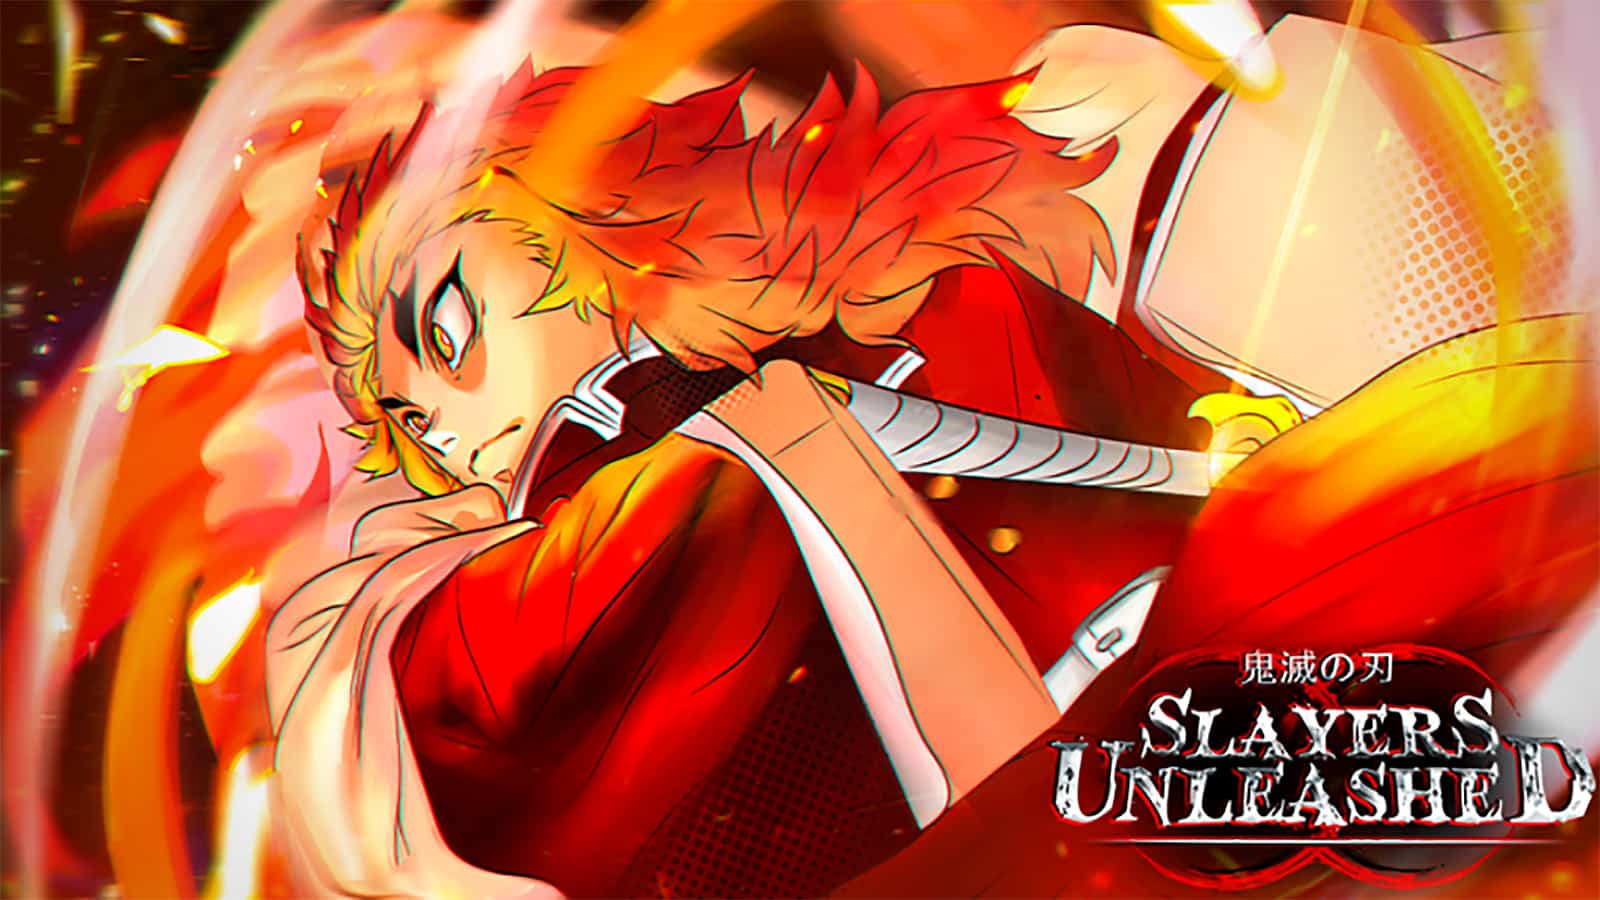 Artwork for Slayers Unleashed in Roblox